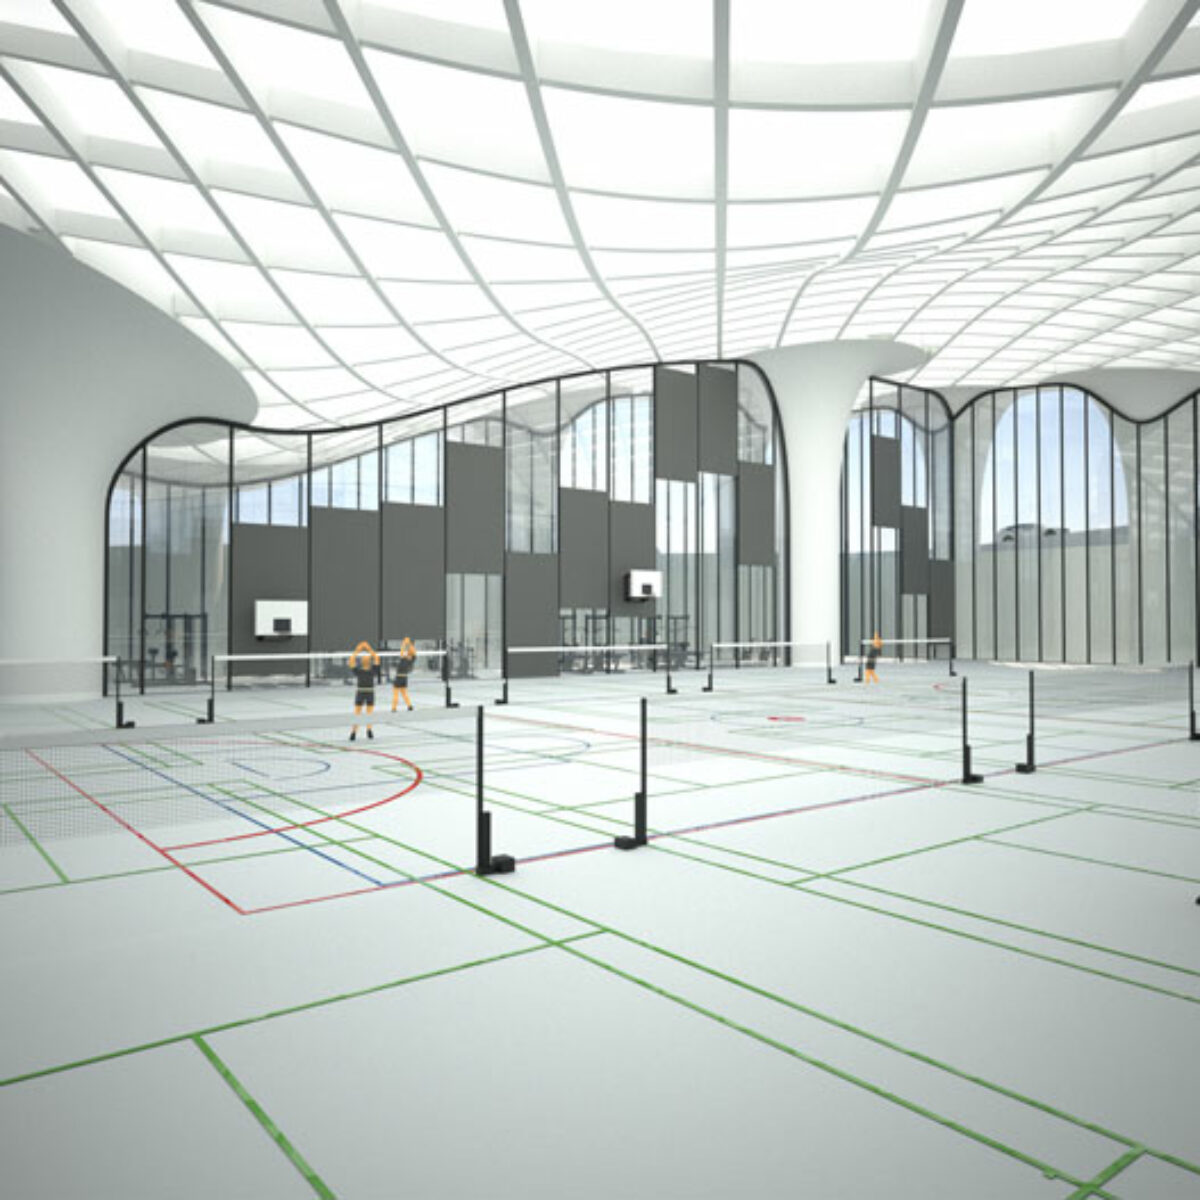 Interior View - The Open Sportscape by Hoofice and Mamou-Mani